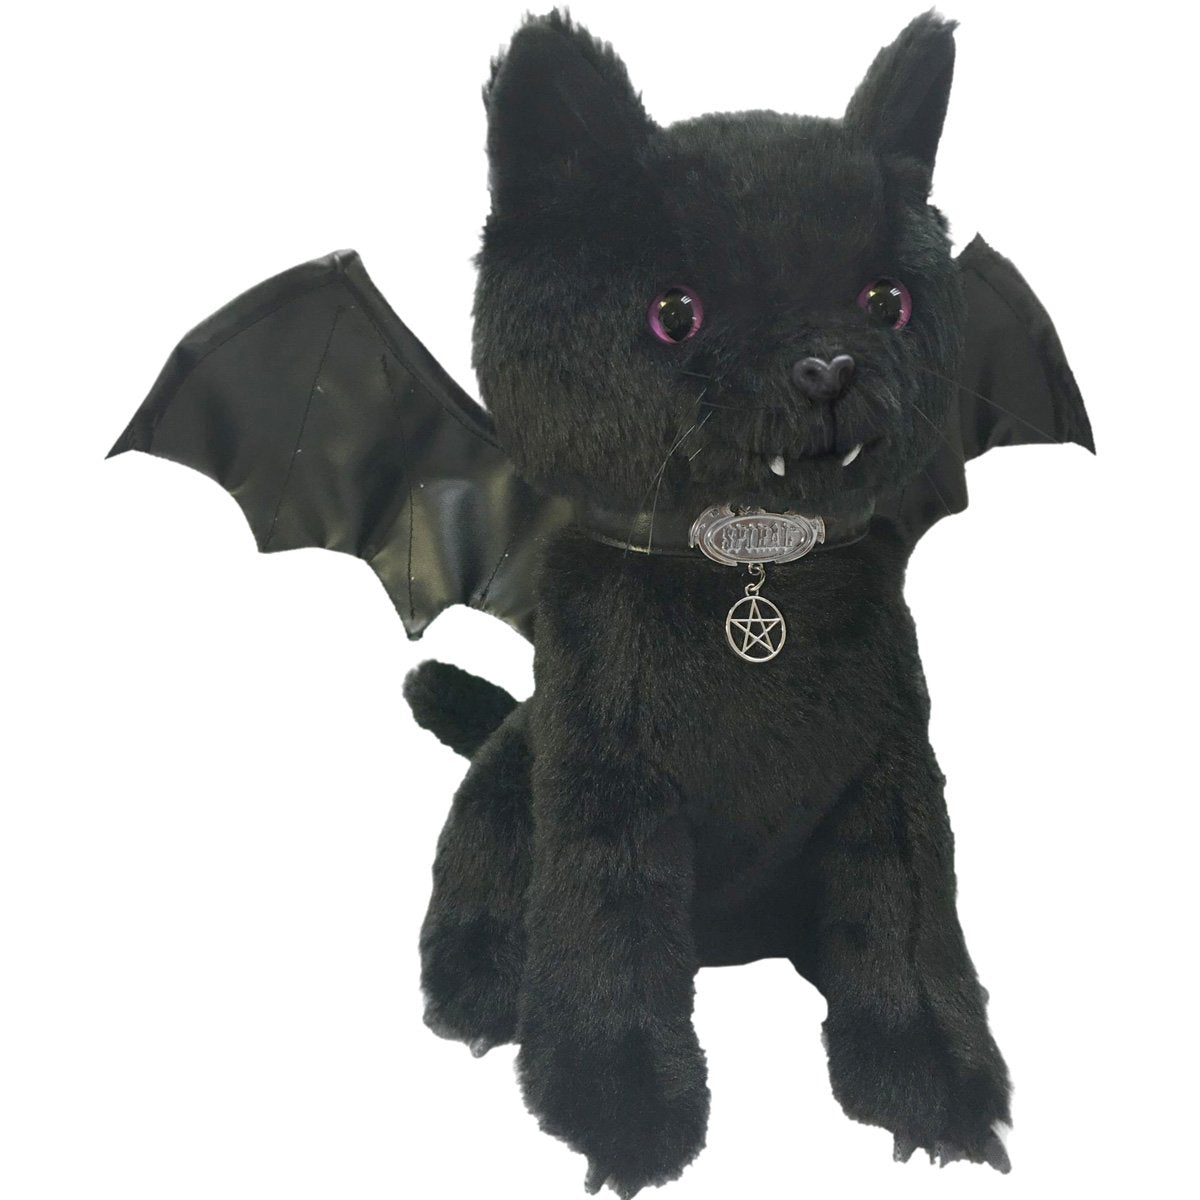 Spiral - Bat Cat - Winged Collectable Soft Plush Toy 12 inch